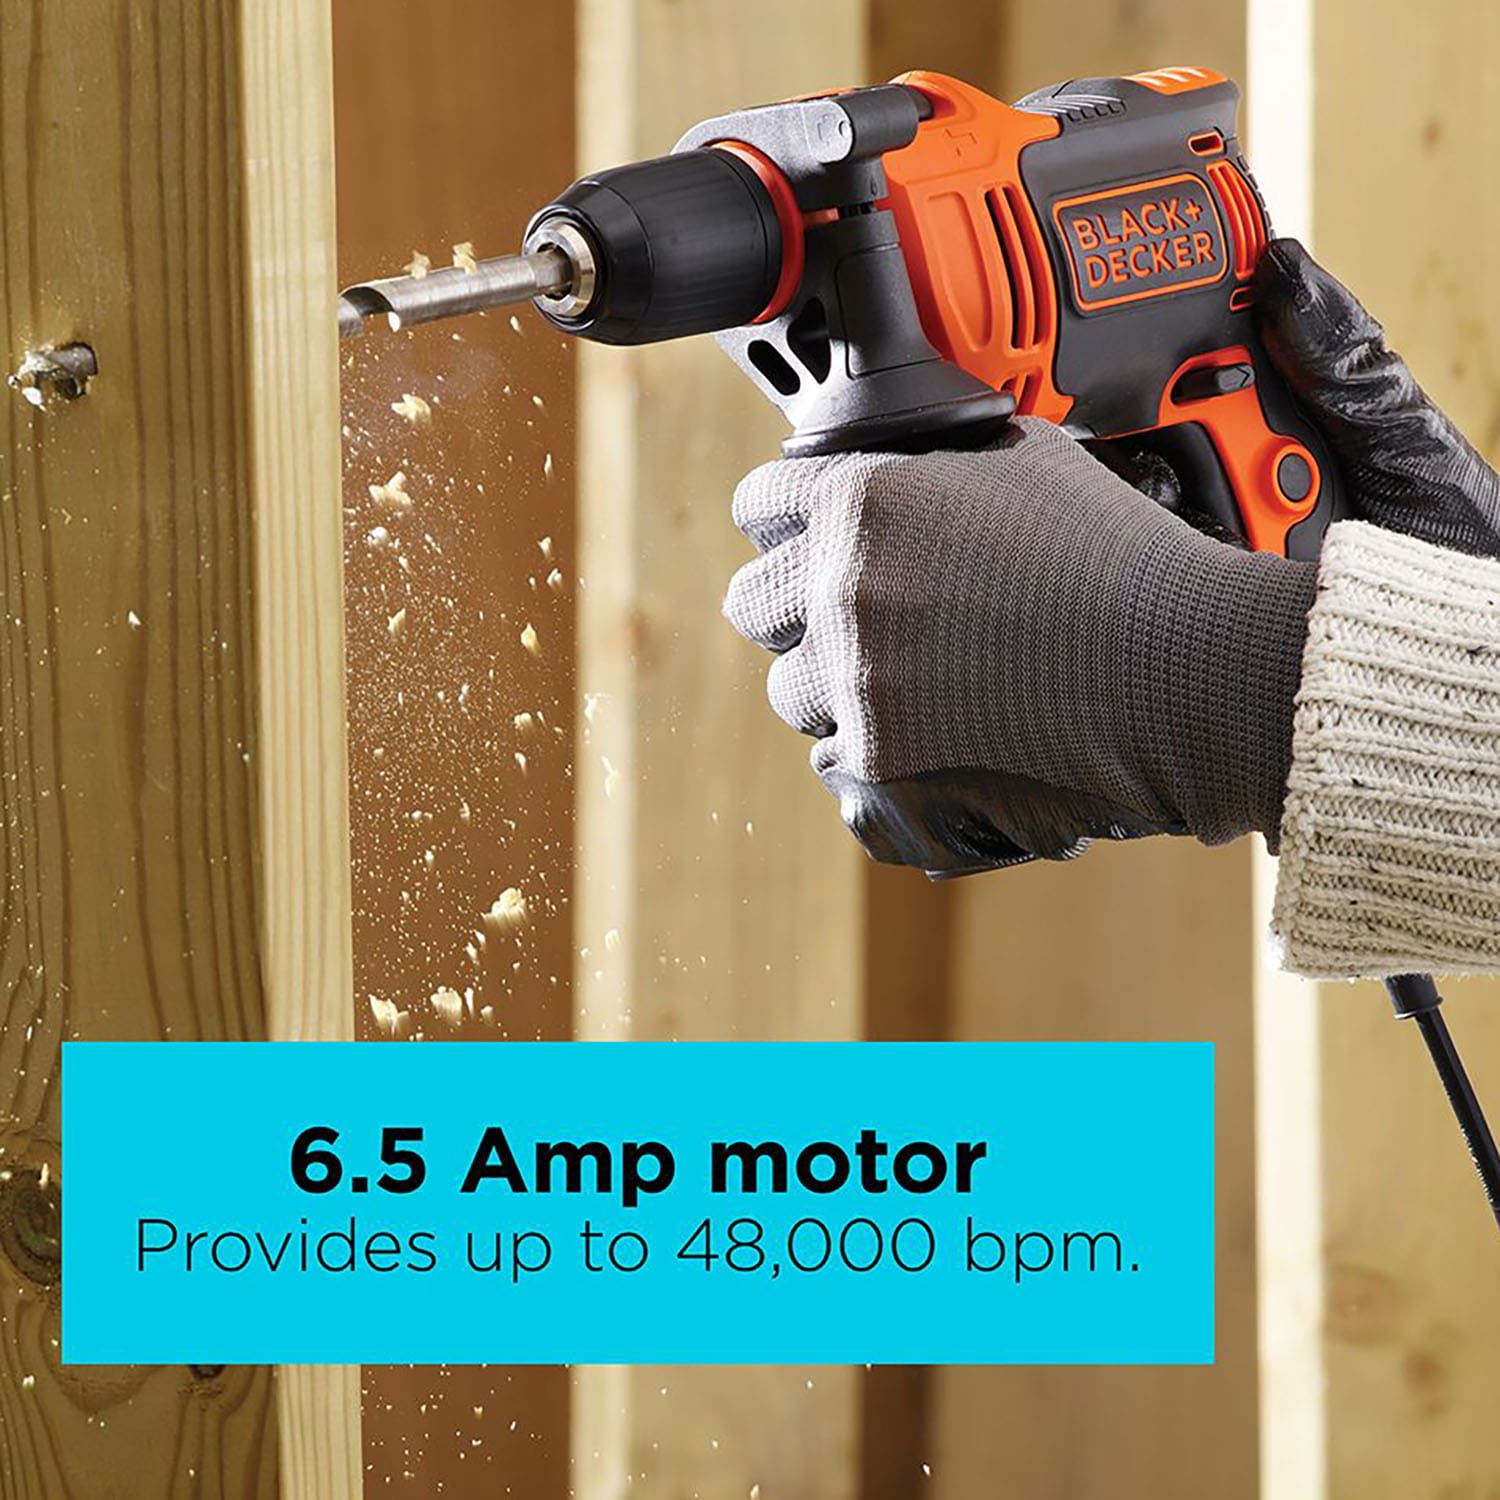 Black & Decker 1/2 In. 7-Amp Keyed Electric Drill/Driver - Power